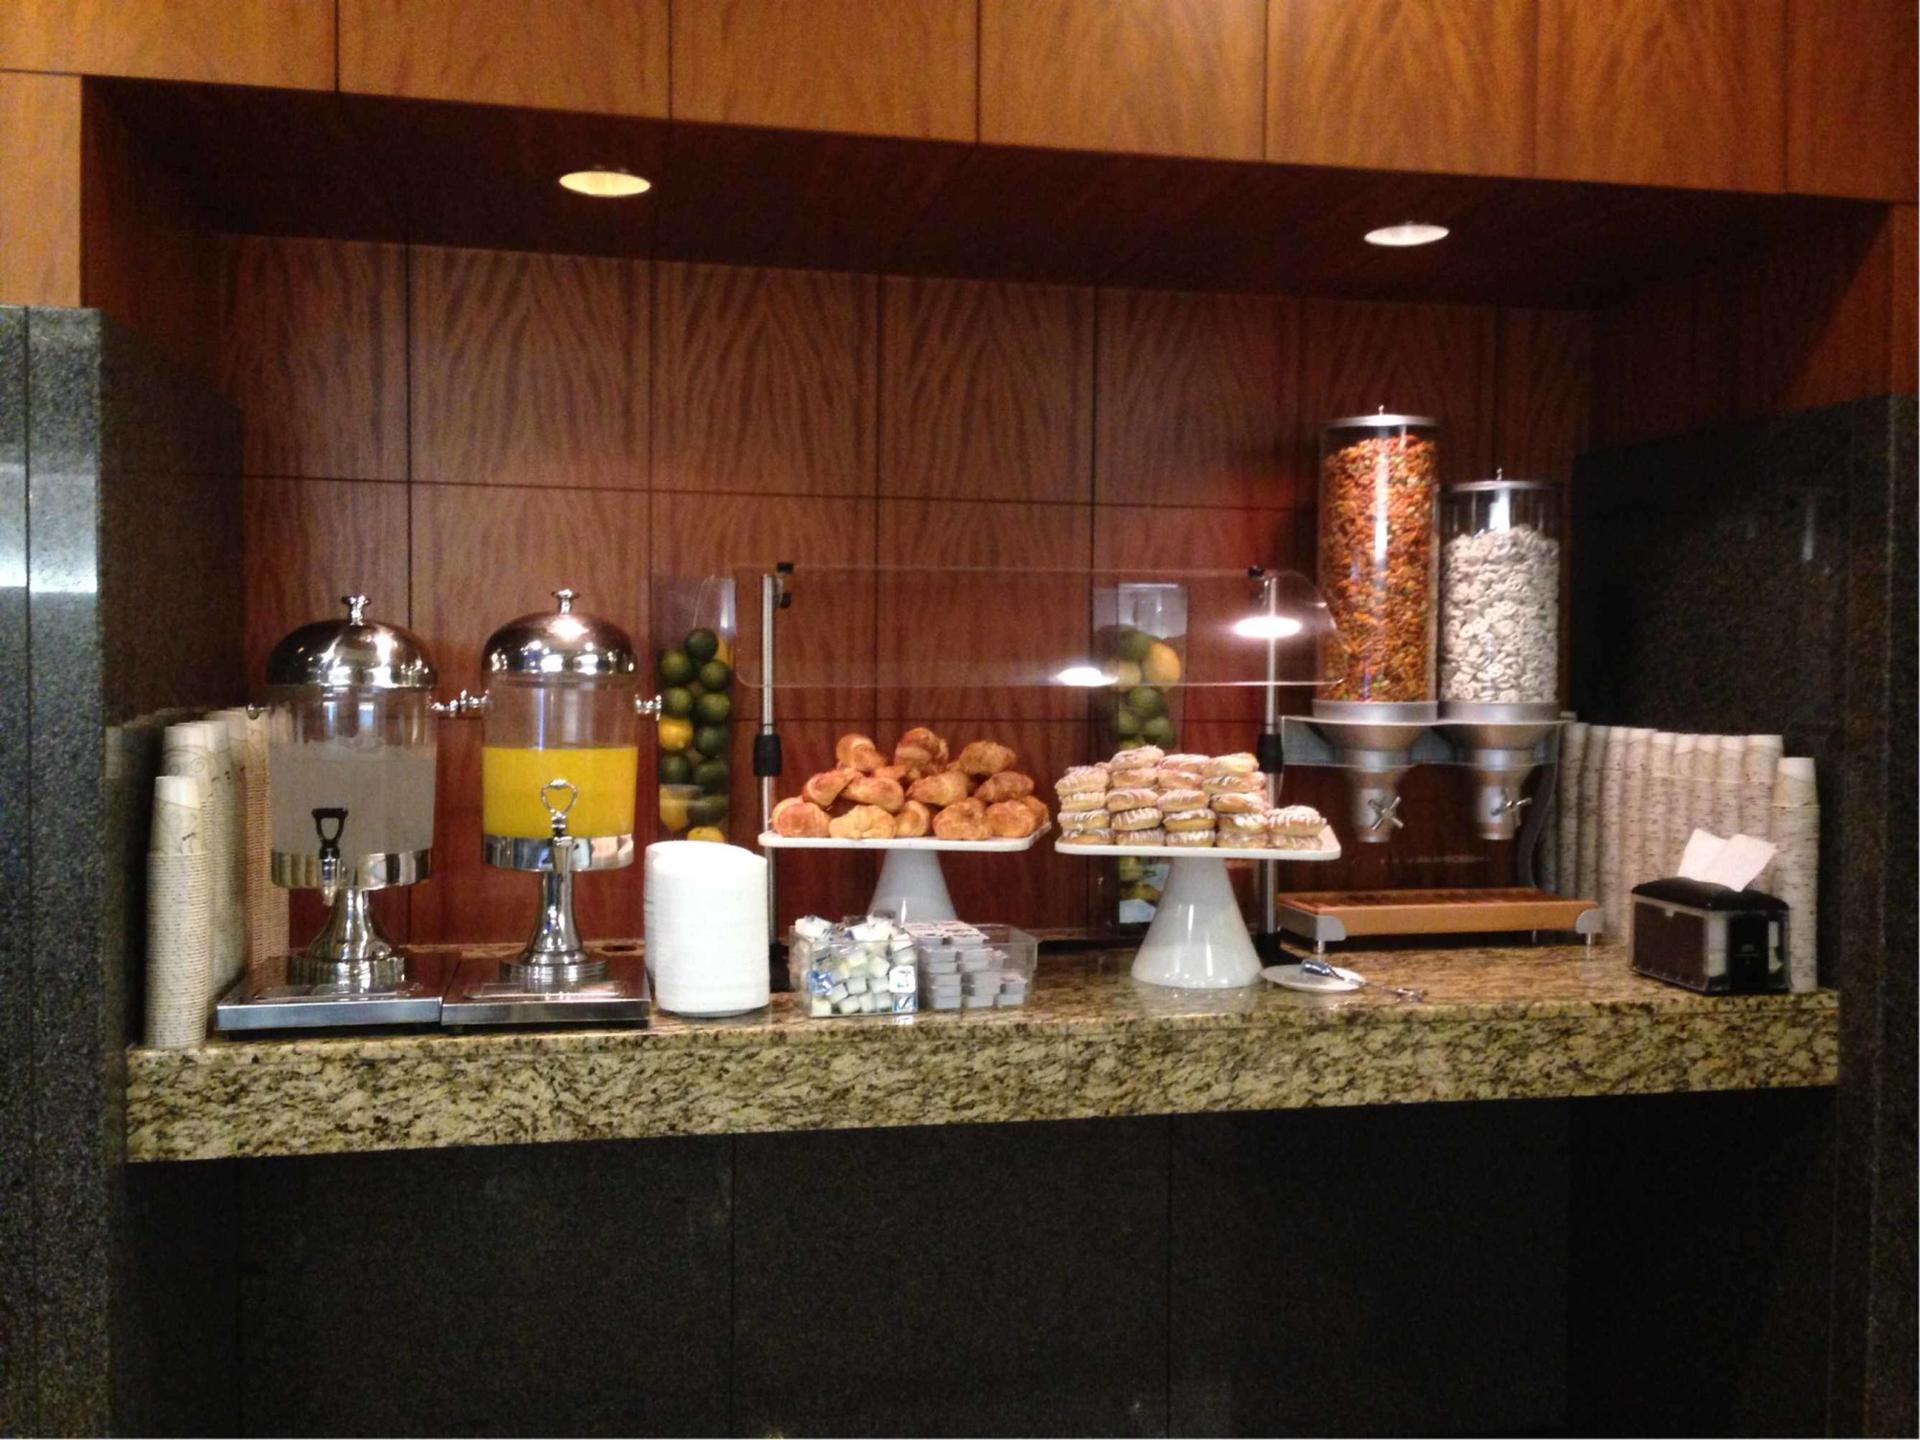 American Airlines Admirals Club image 15 of 50